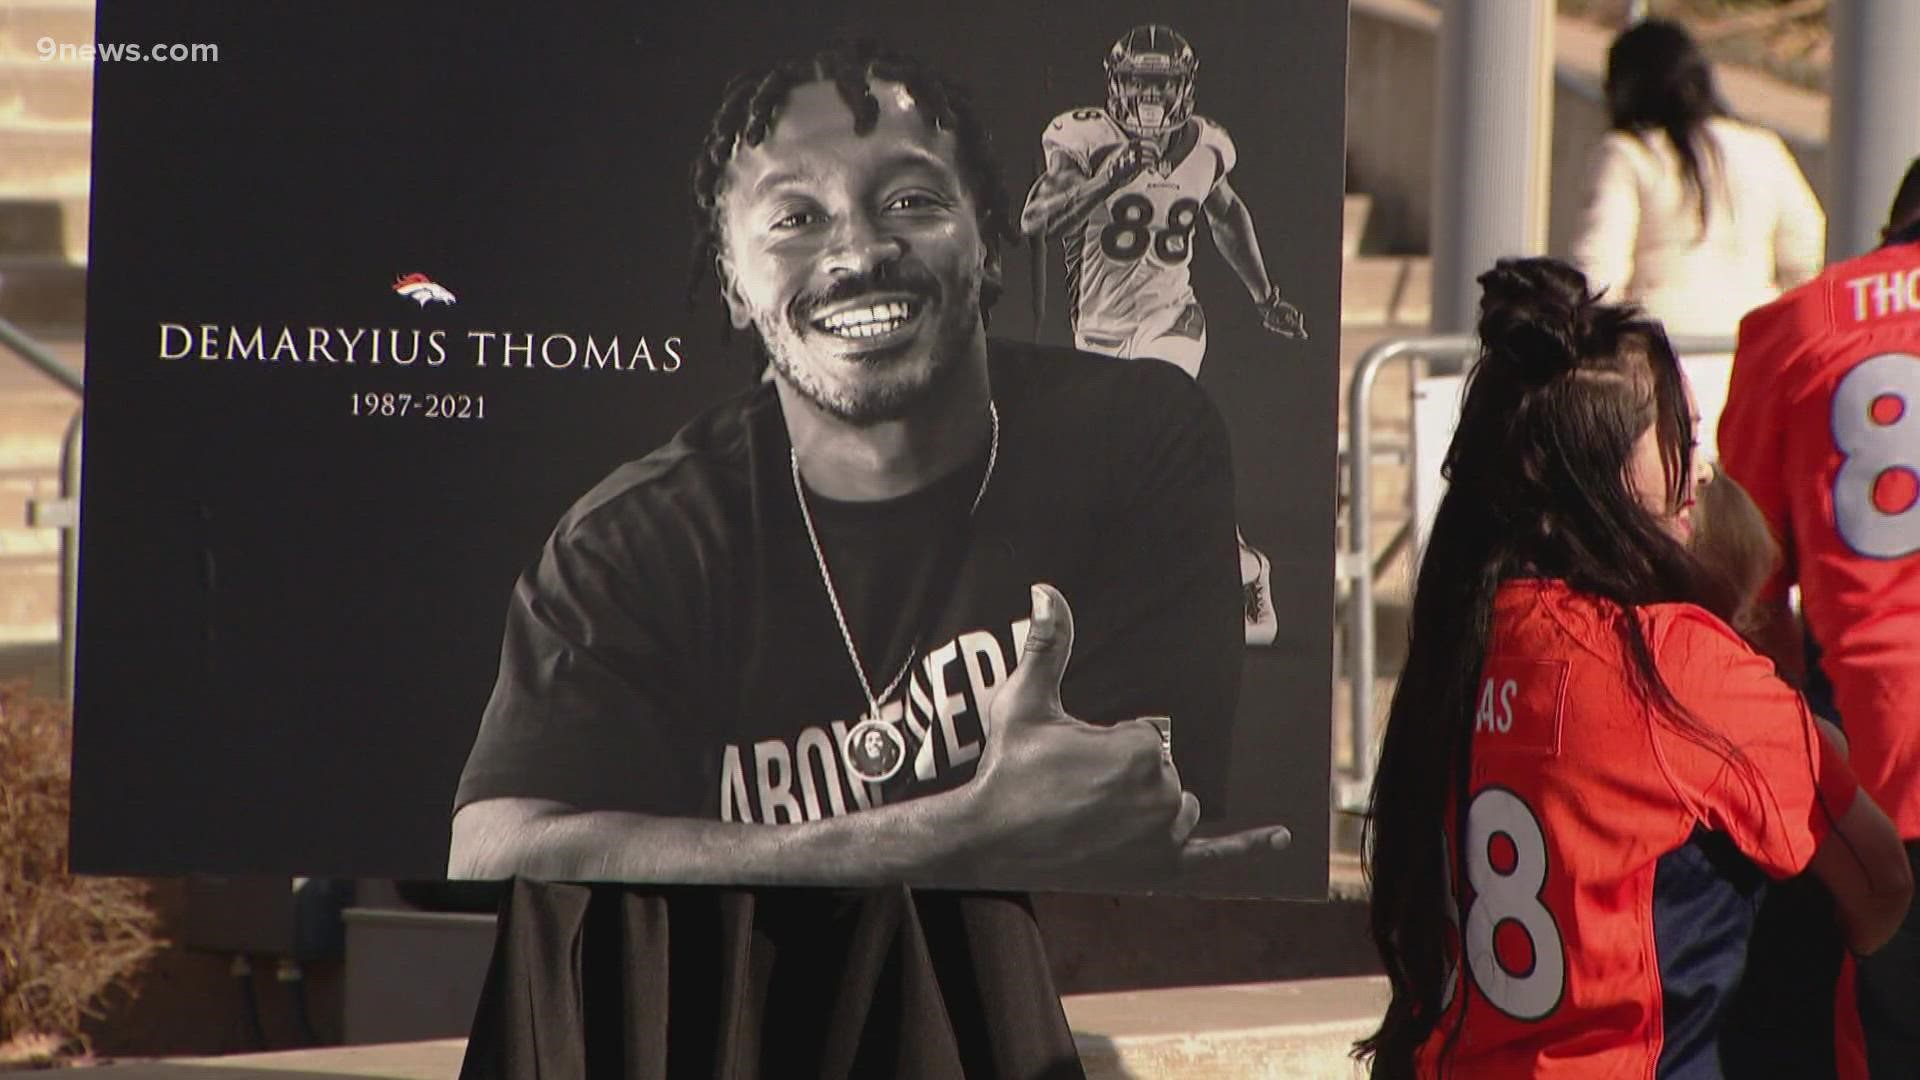 The Broncos and their fans paid tribute to Demaryius Thomas on Sunday. Thomas passed away on Thursday at age 33, just weeks away from his 34th birthday.